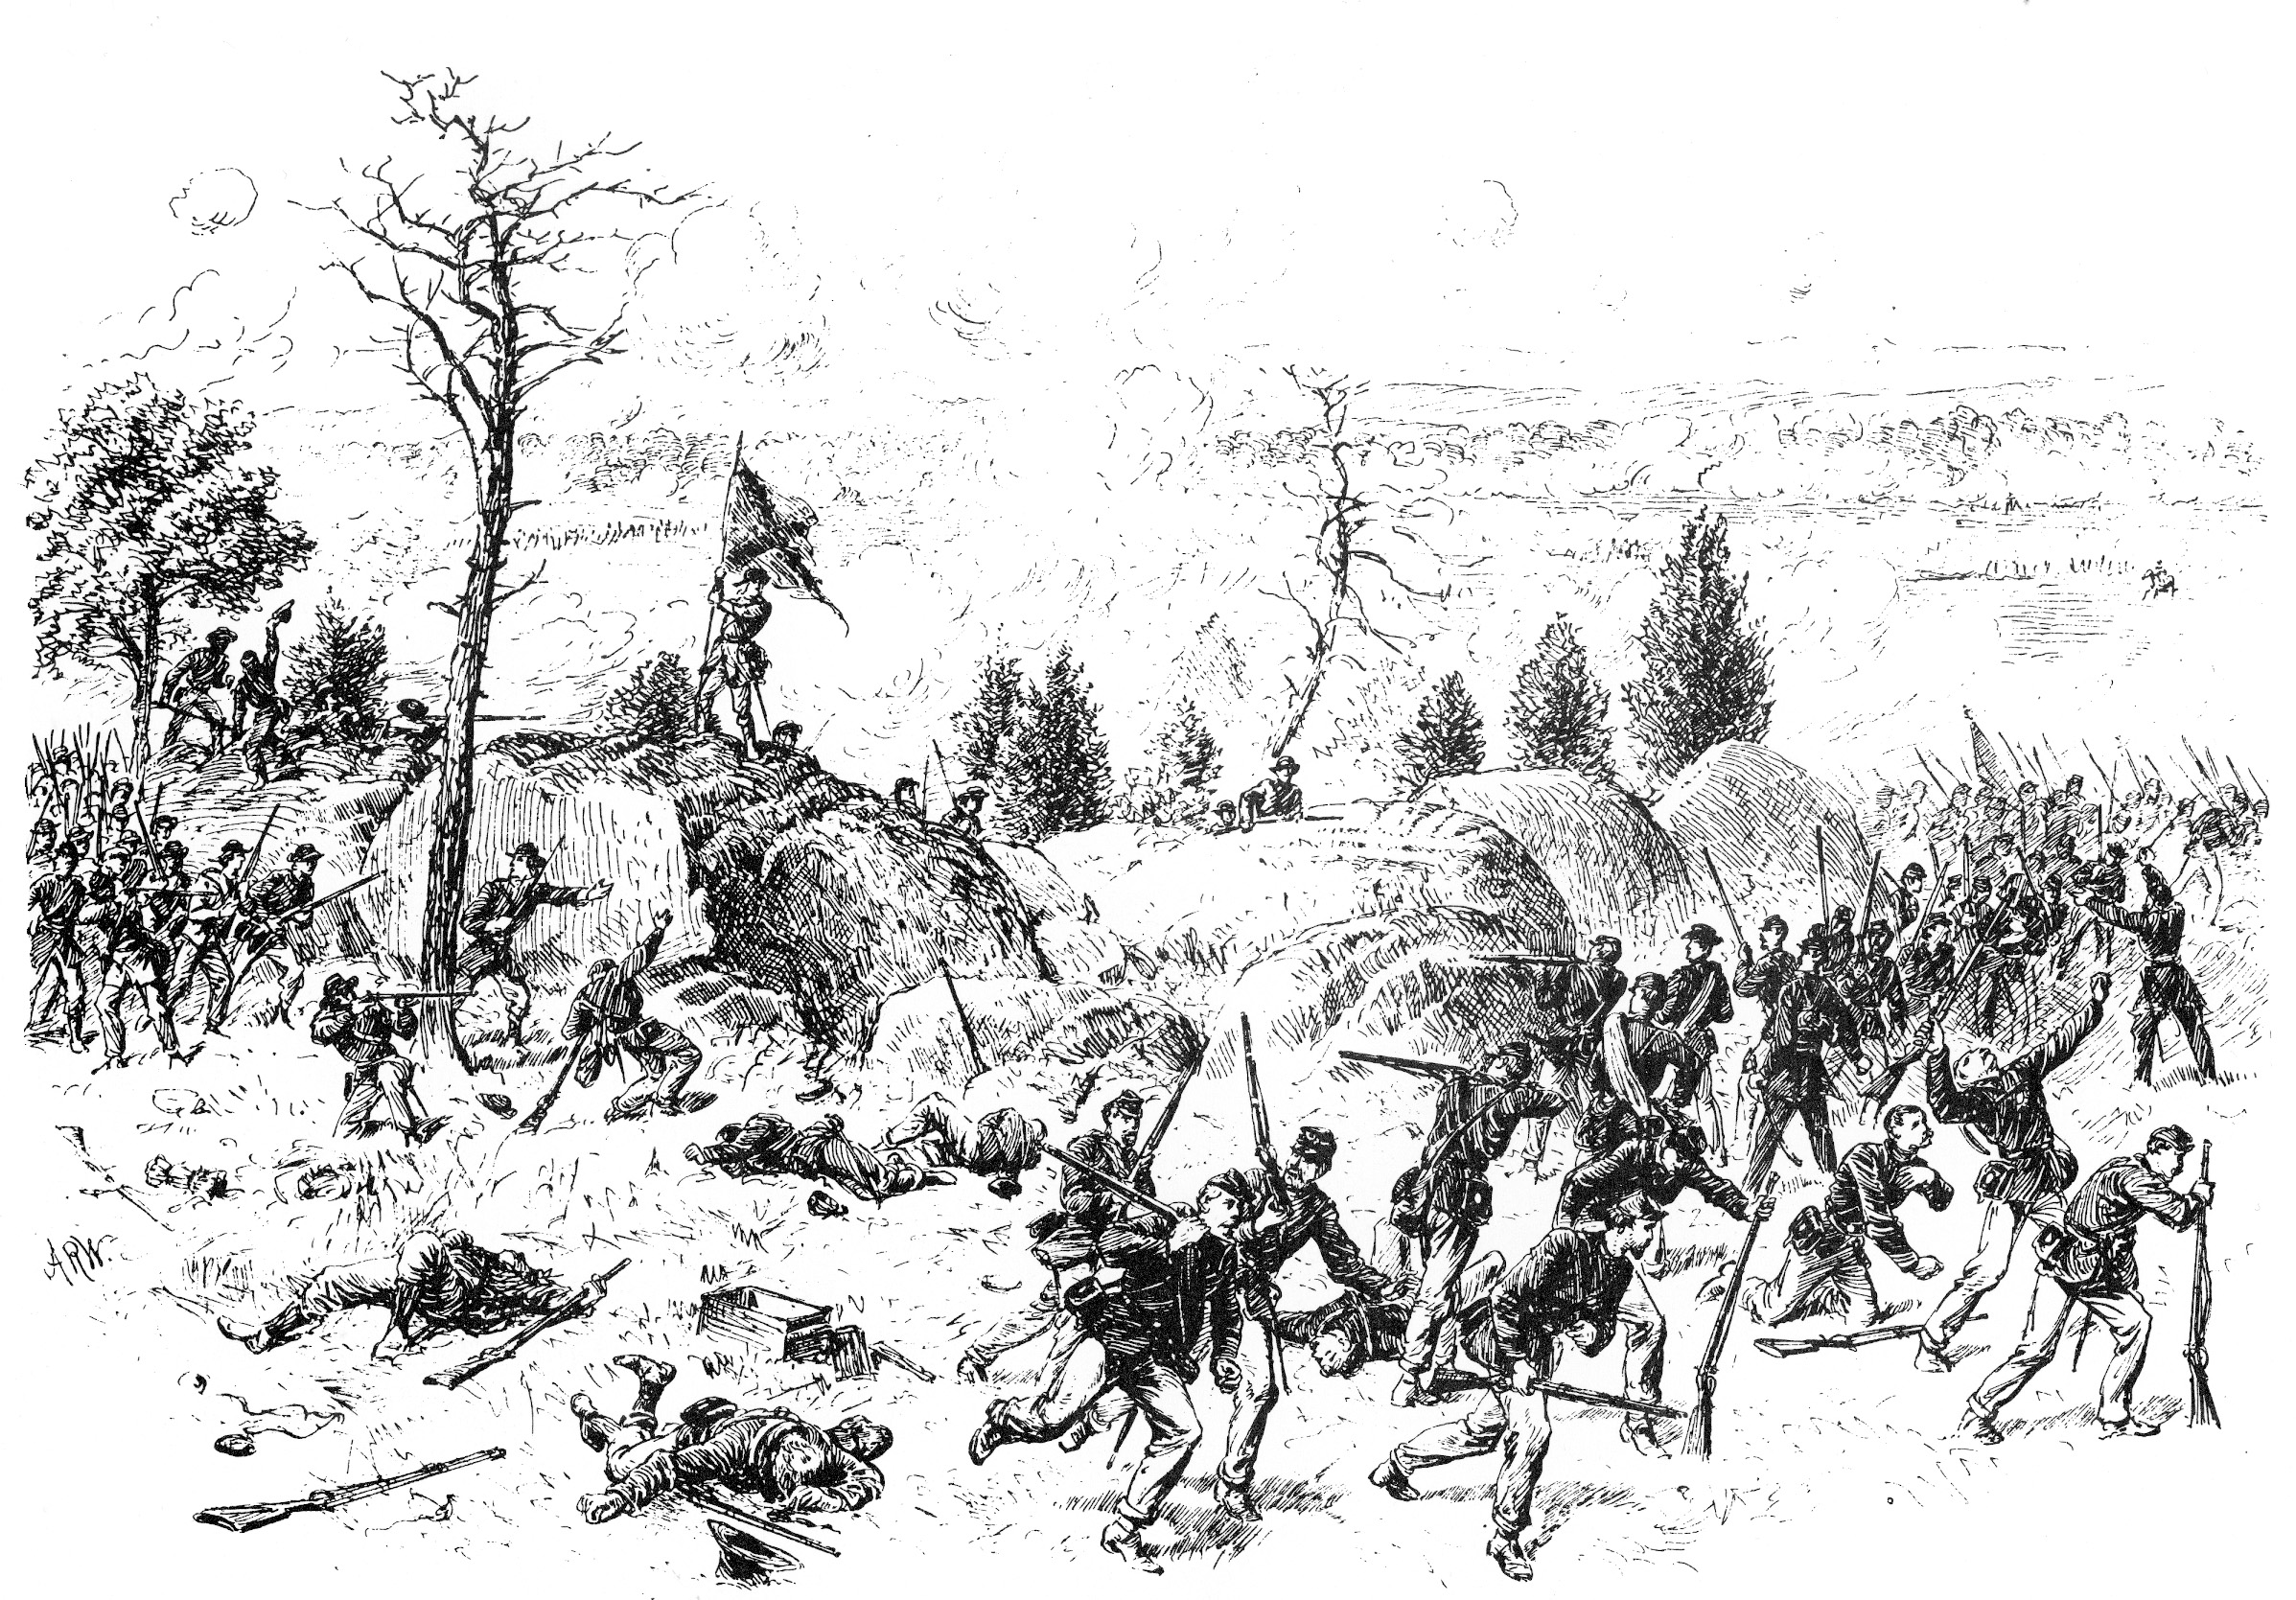 Alfred Waud sketched the scene of Benning and Robertson’s men pressing on Ward’s defenders along Houck’s Ridge. 